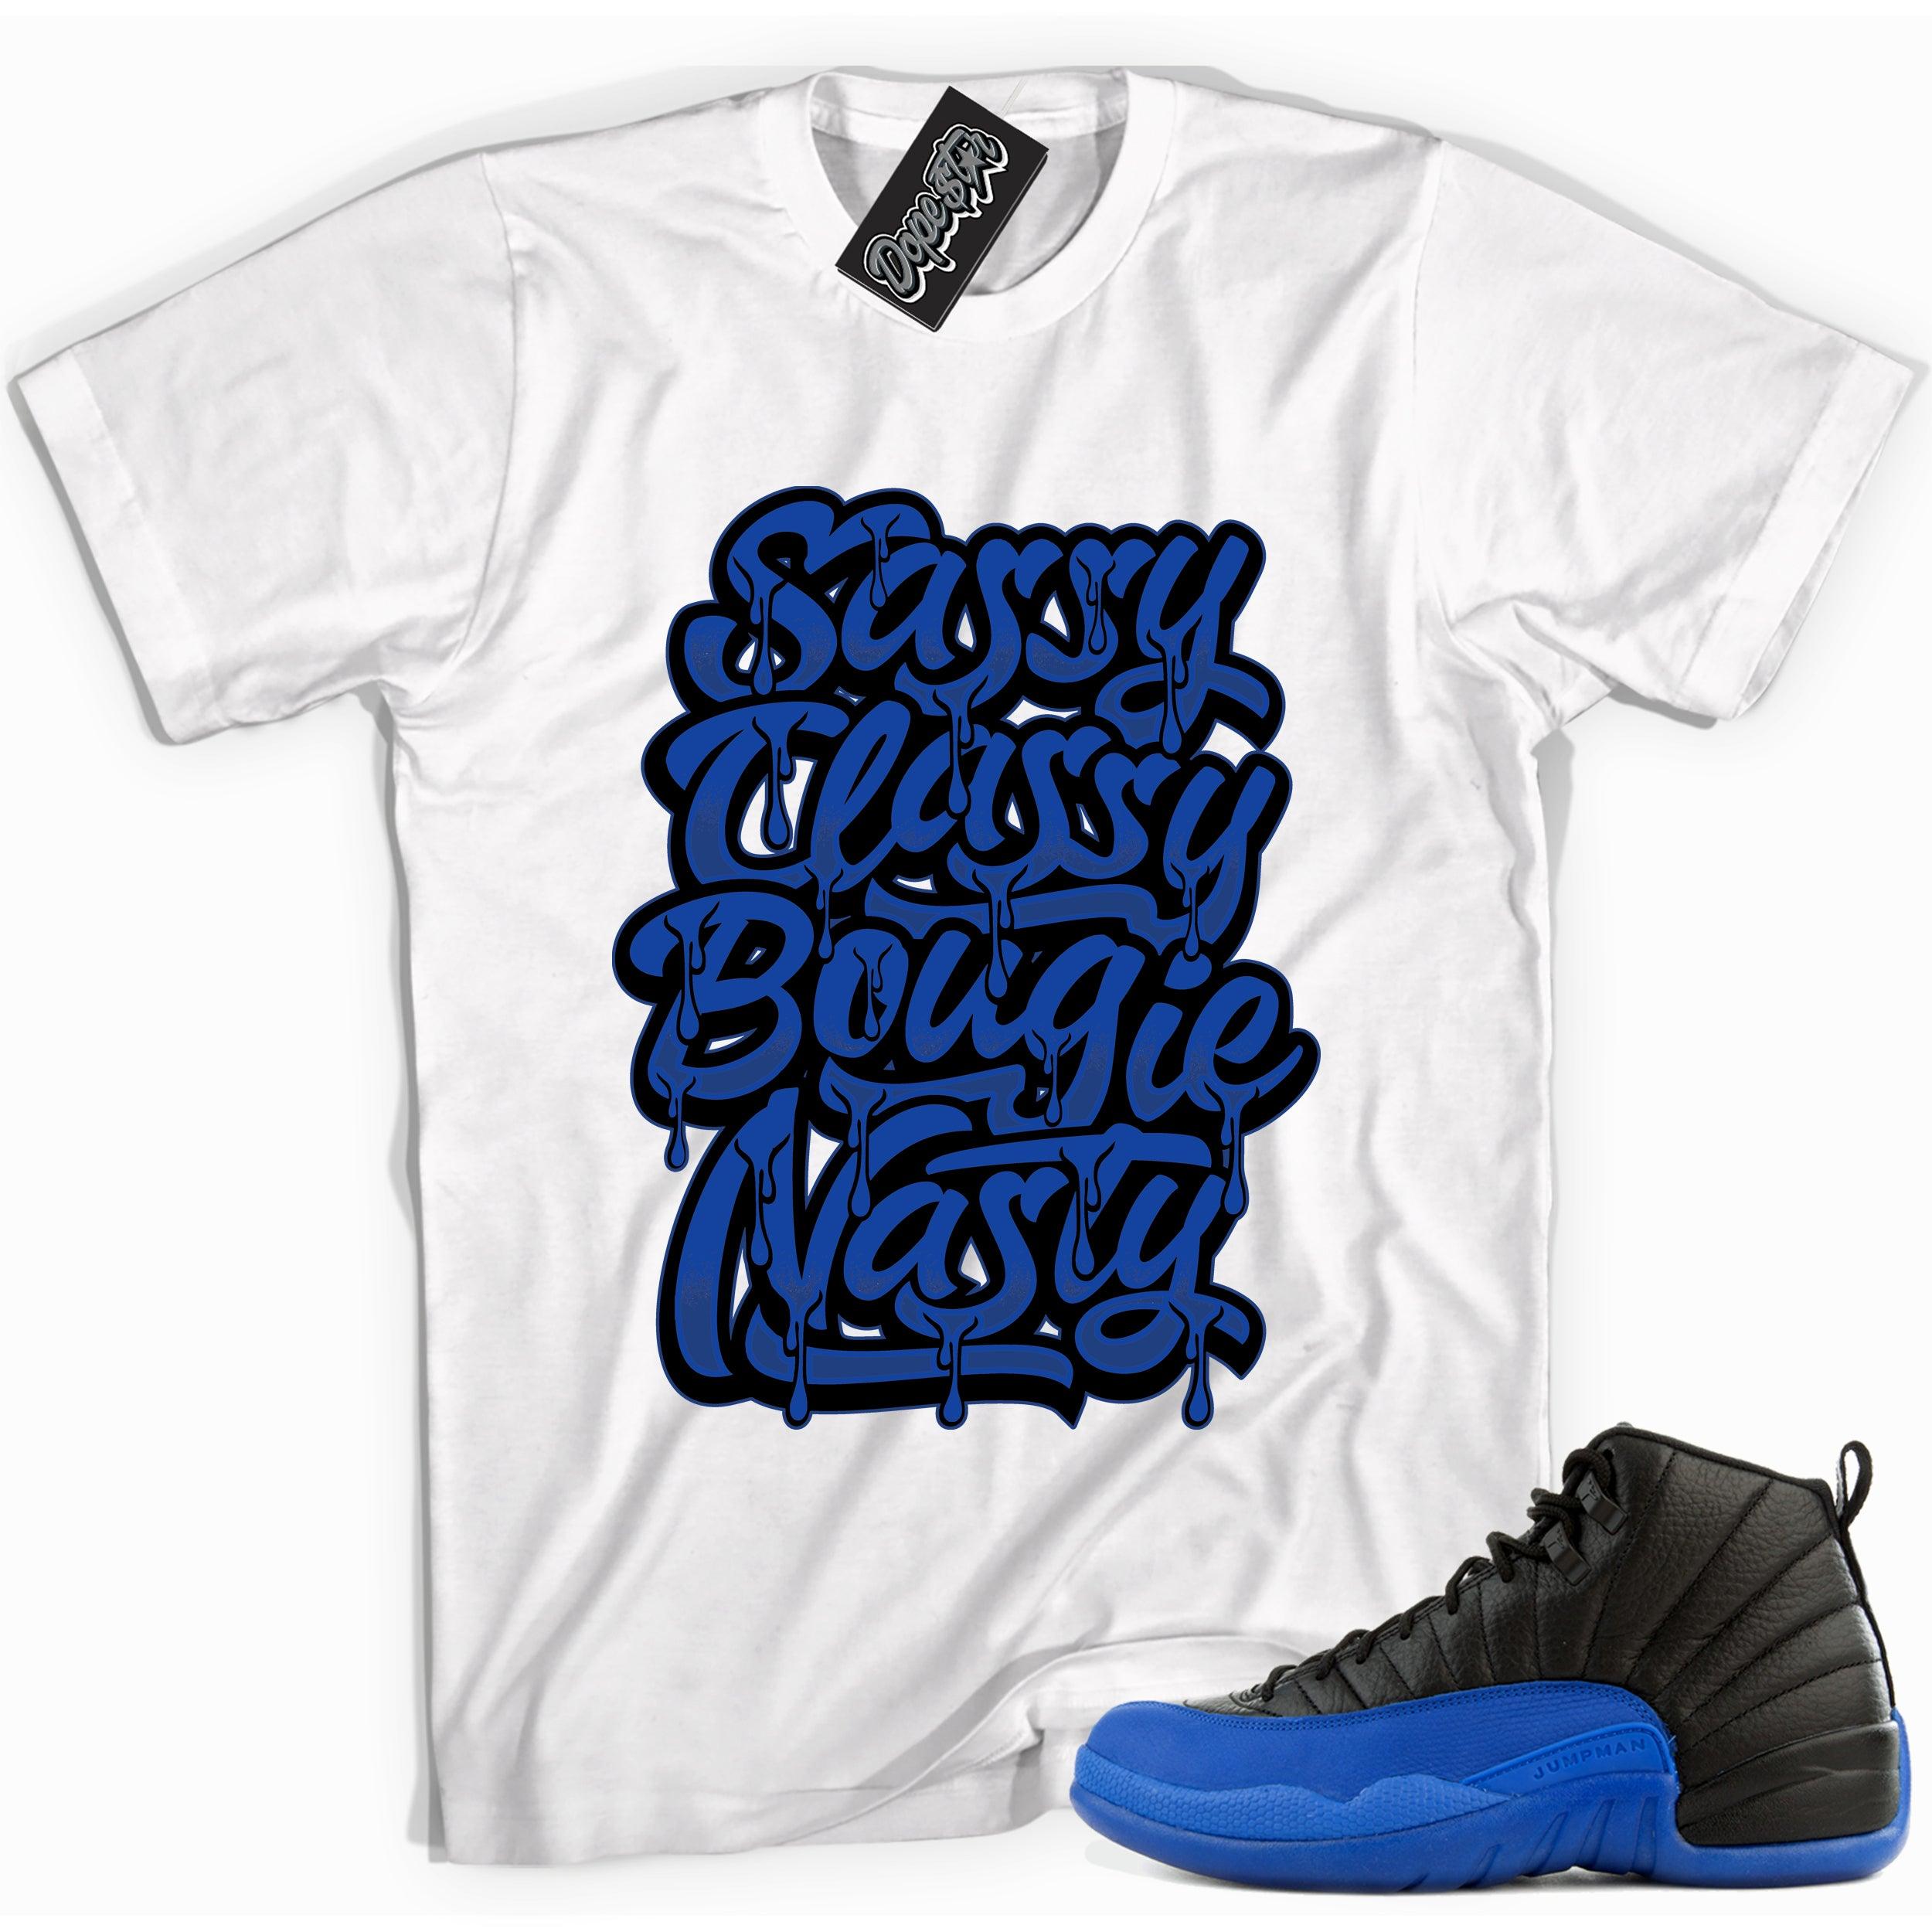 Cool white graphic tee with 'sassy classy' print, that perfectly matches Air Jordan 12 Retro Black Game Royal sneakers.